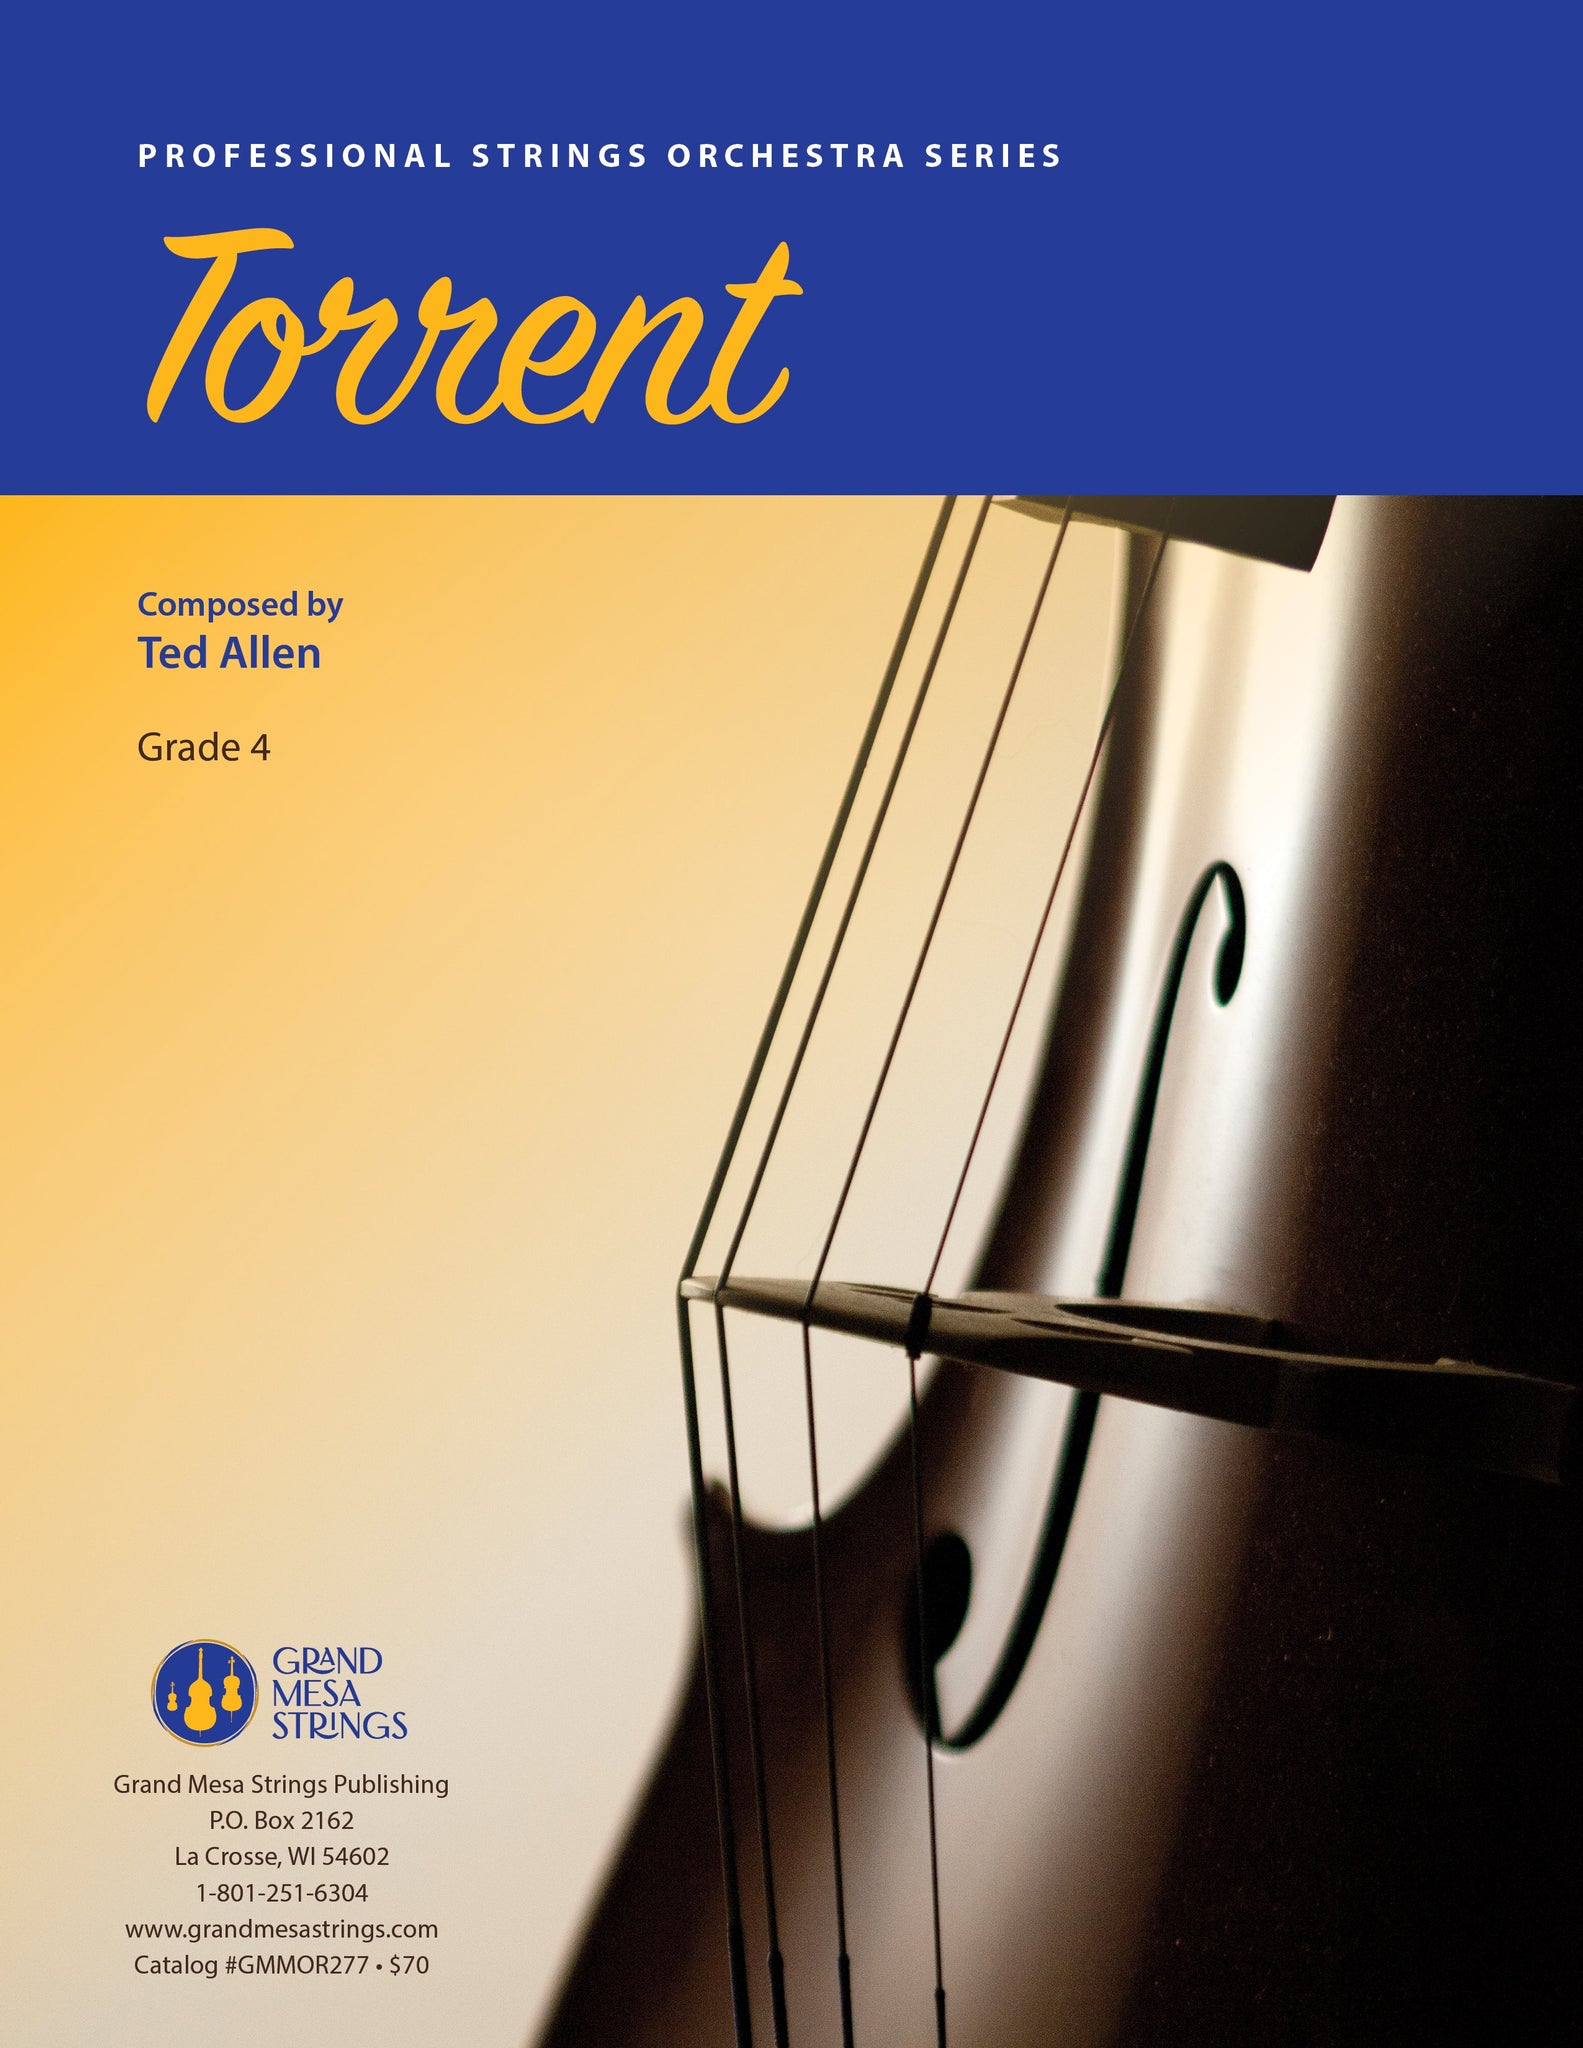 Strings sheet music cover of Torrent, composed by Ted Allen.